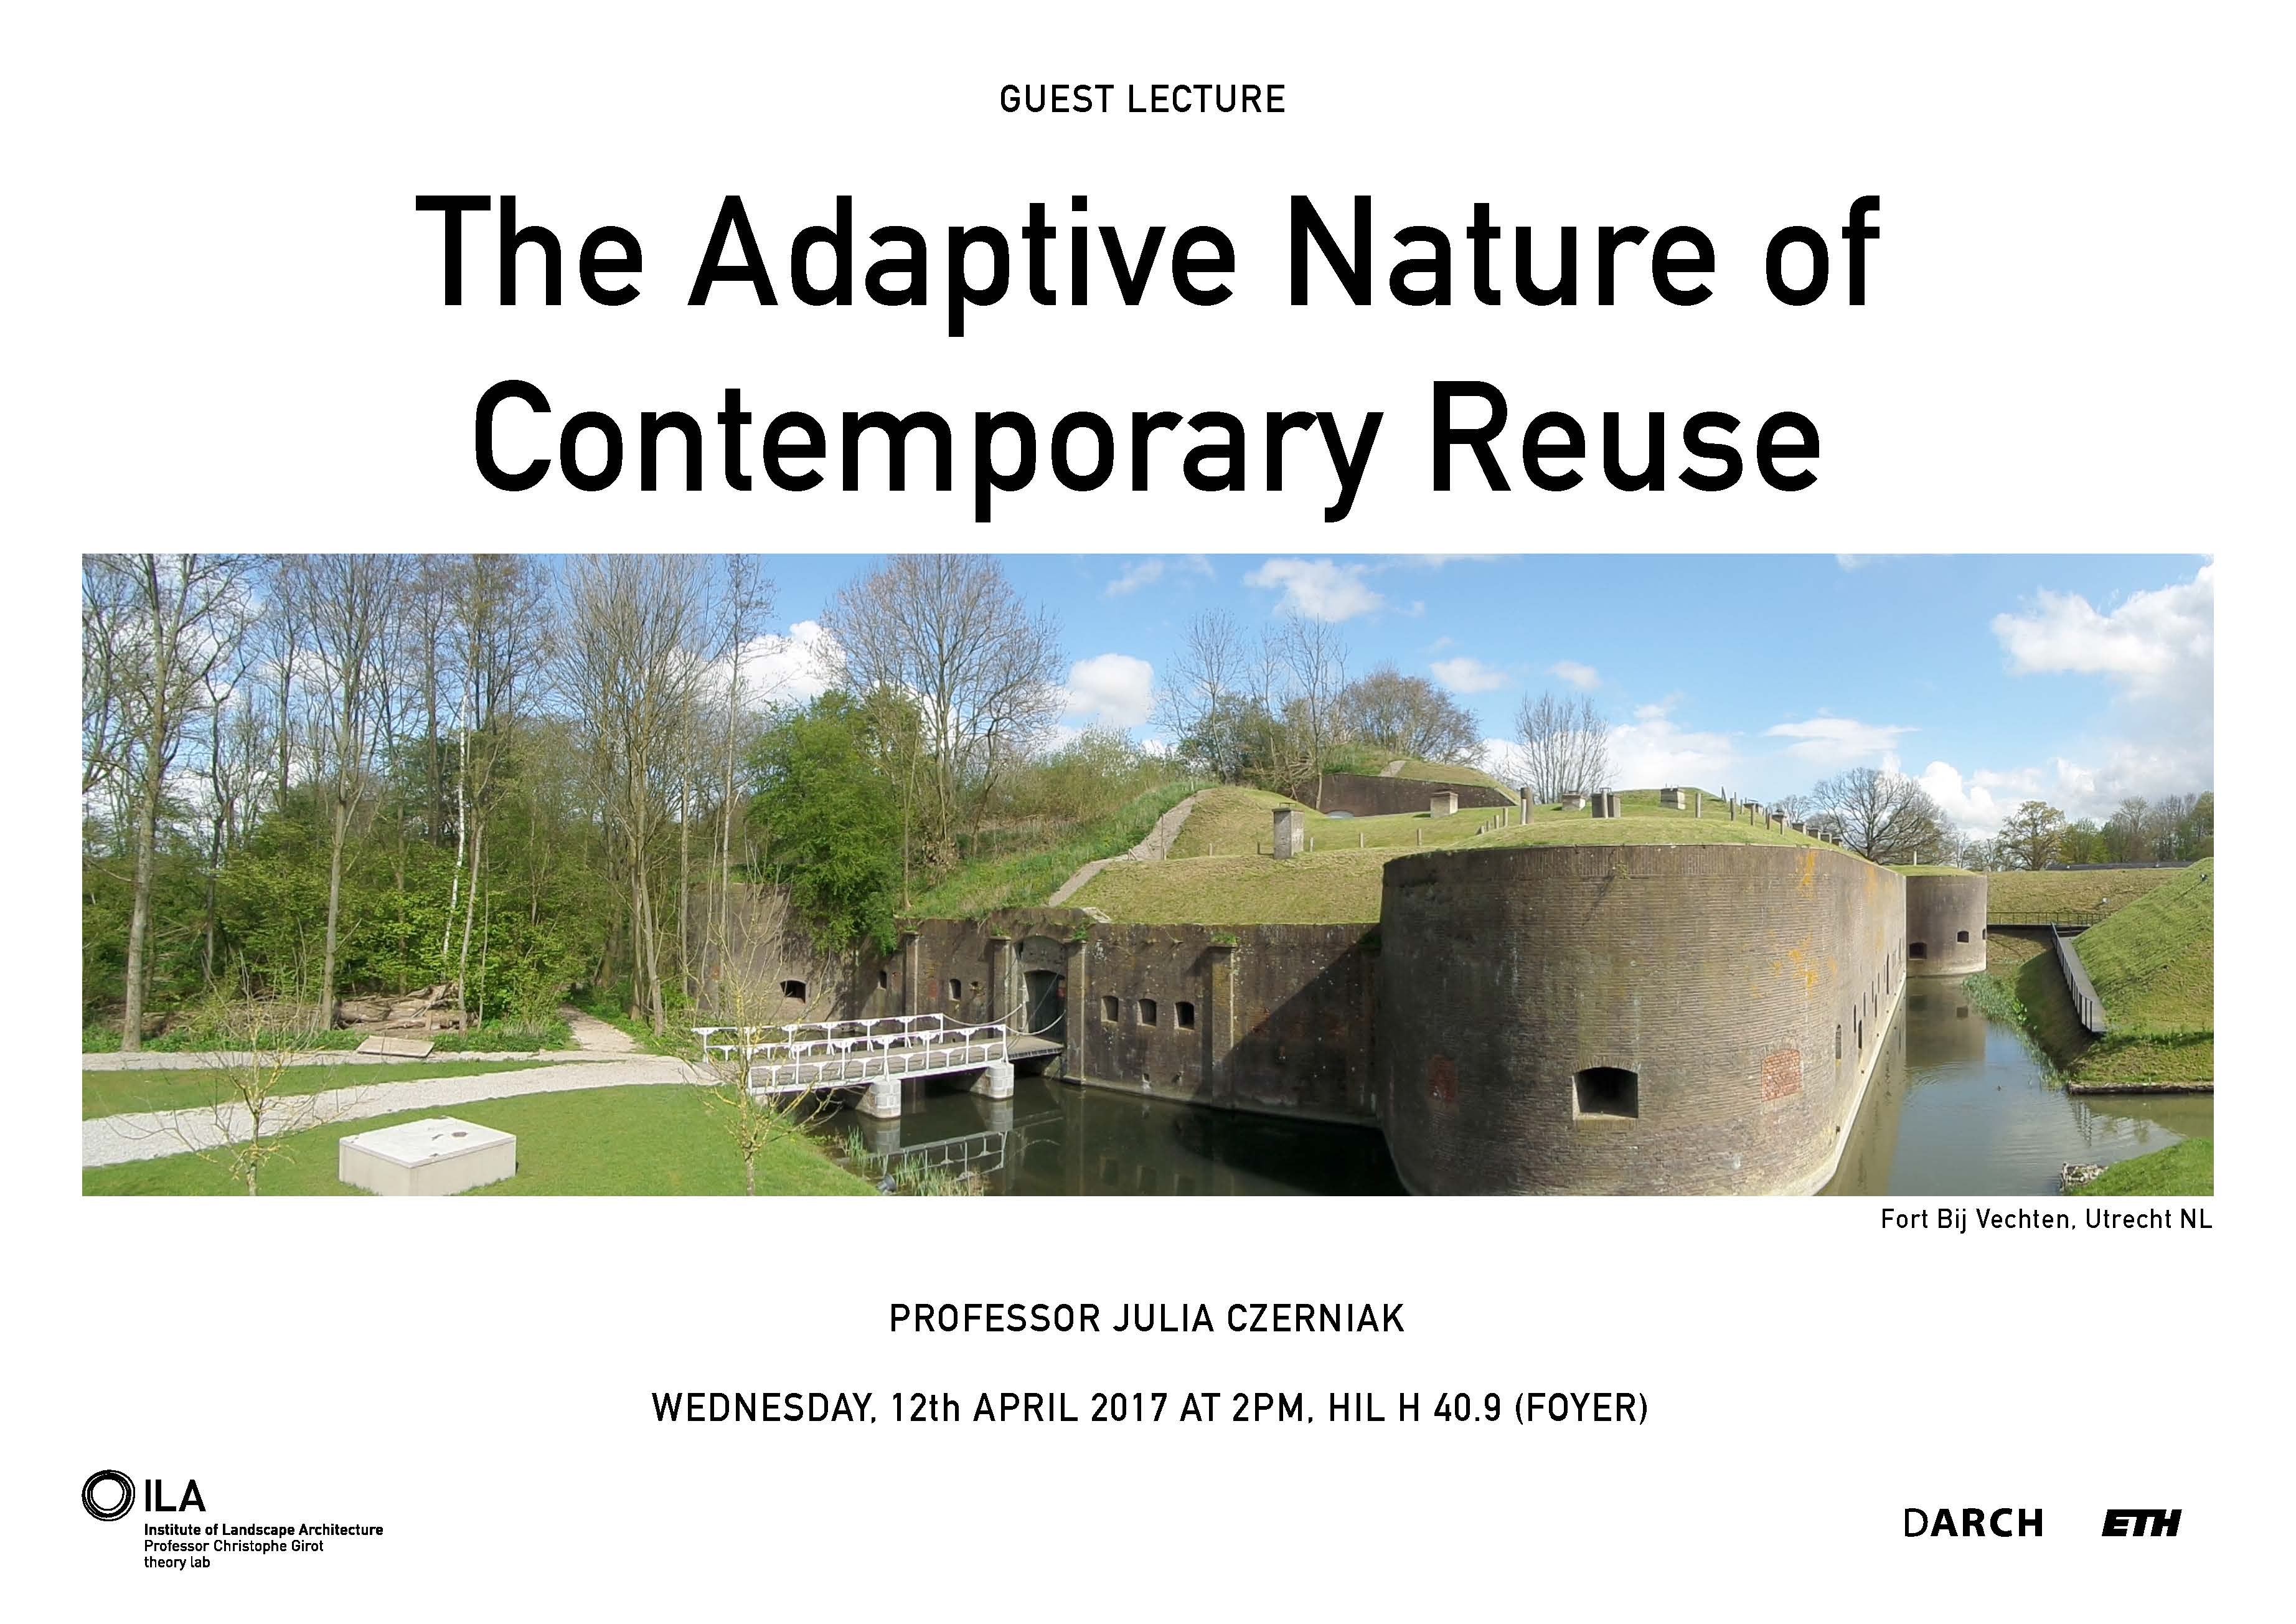 lige ud interval Normal The Adaptive Nature of COntemporary Reuse – Professor Christophe Girot